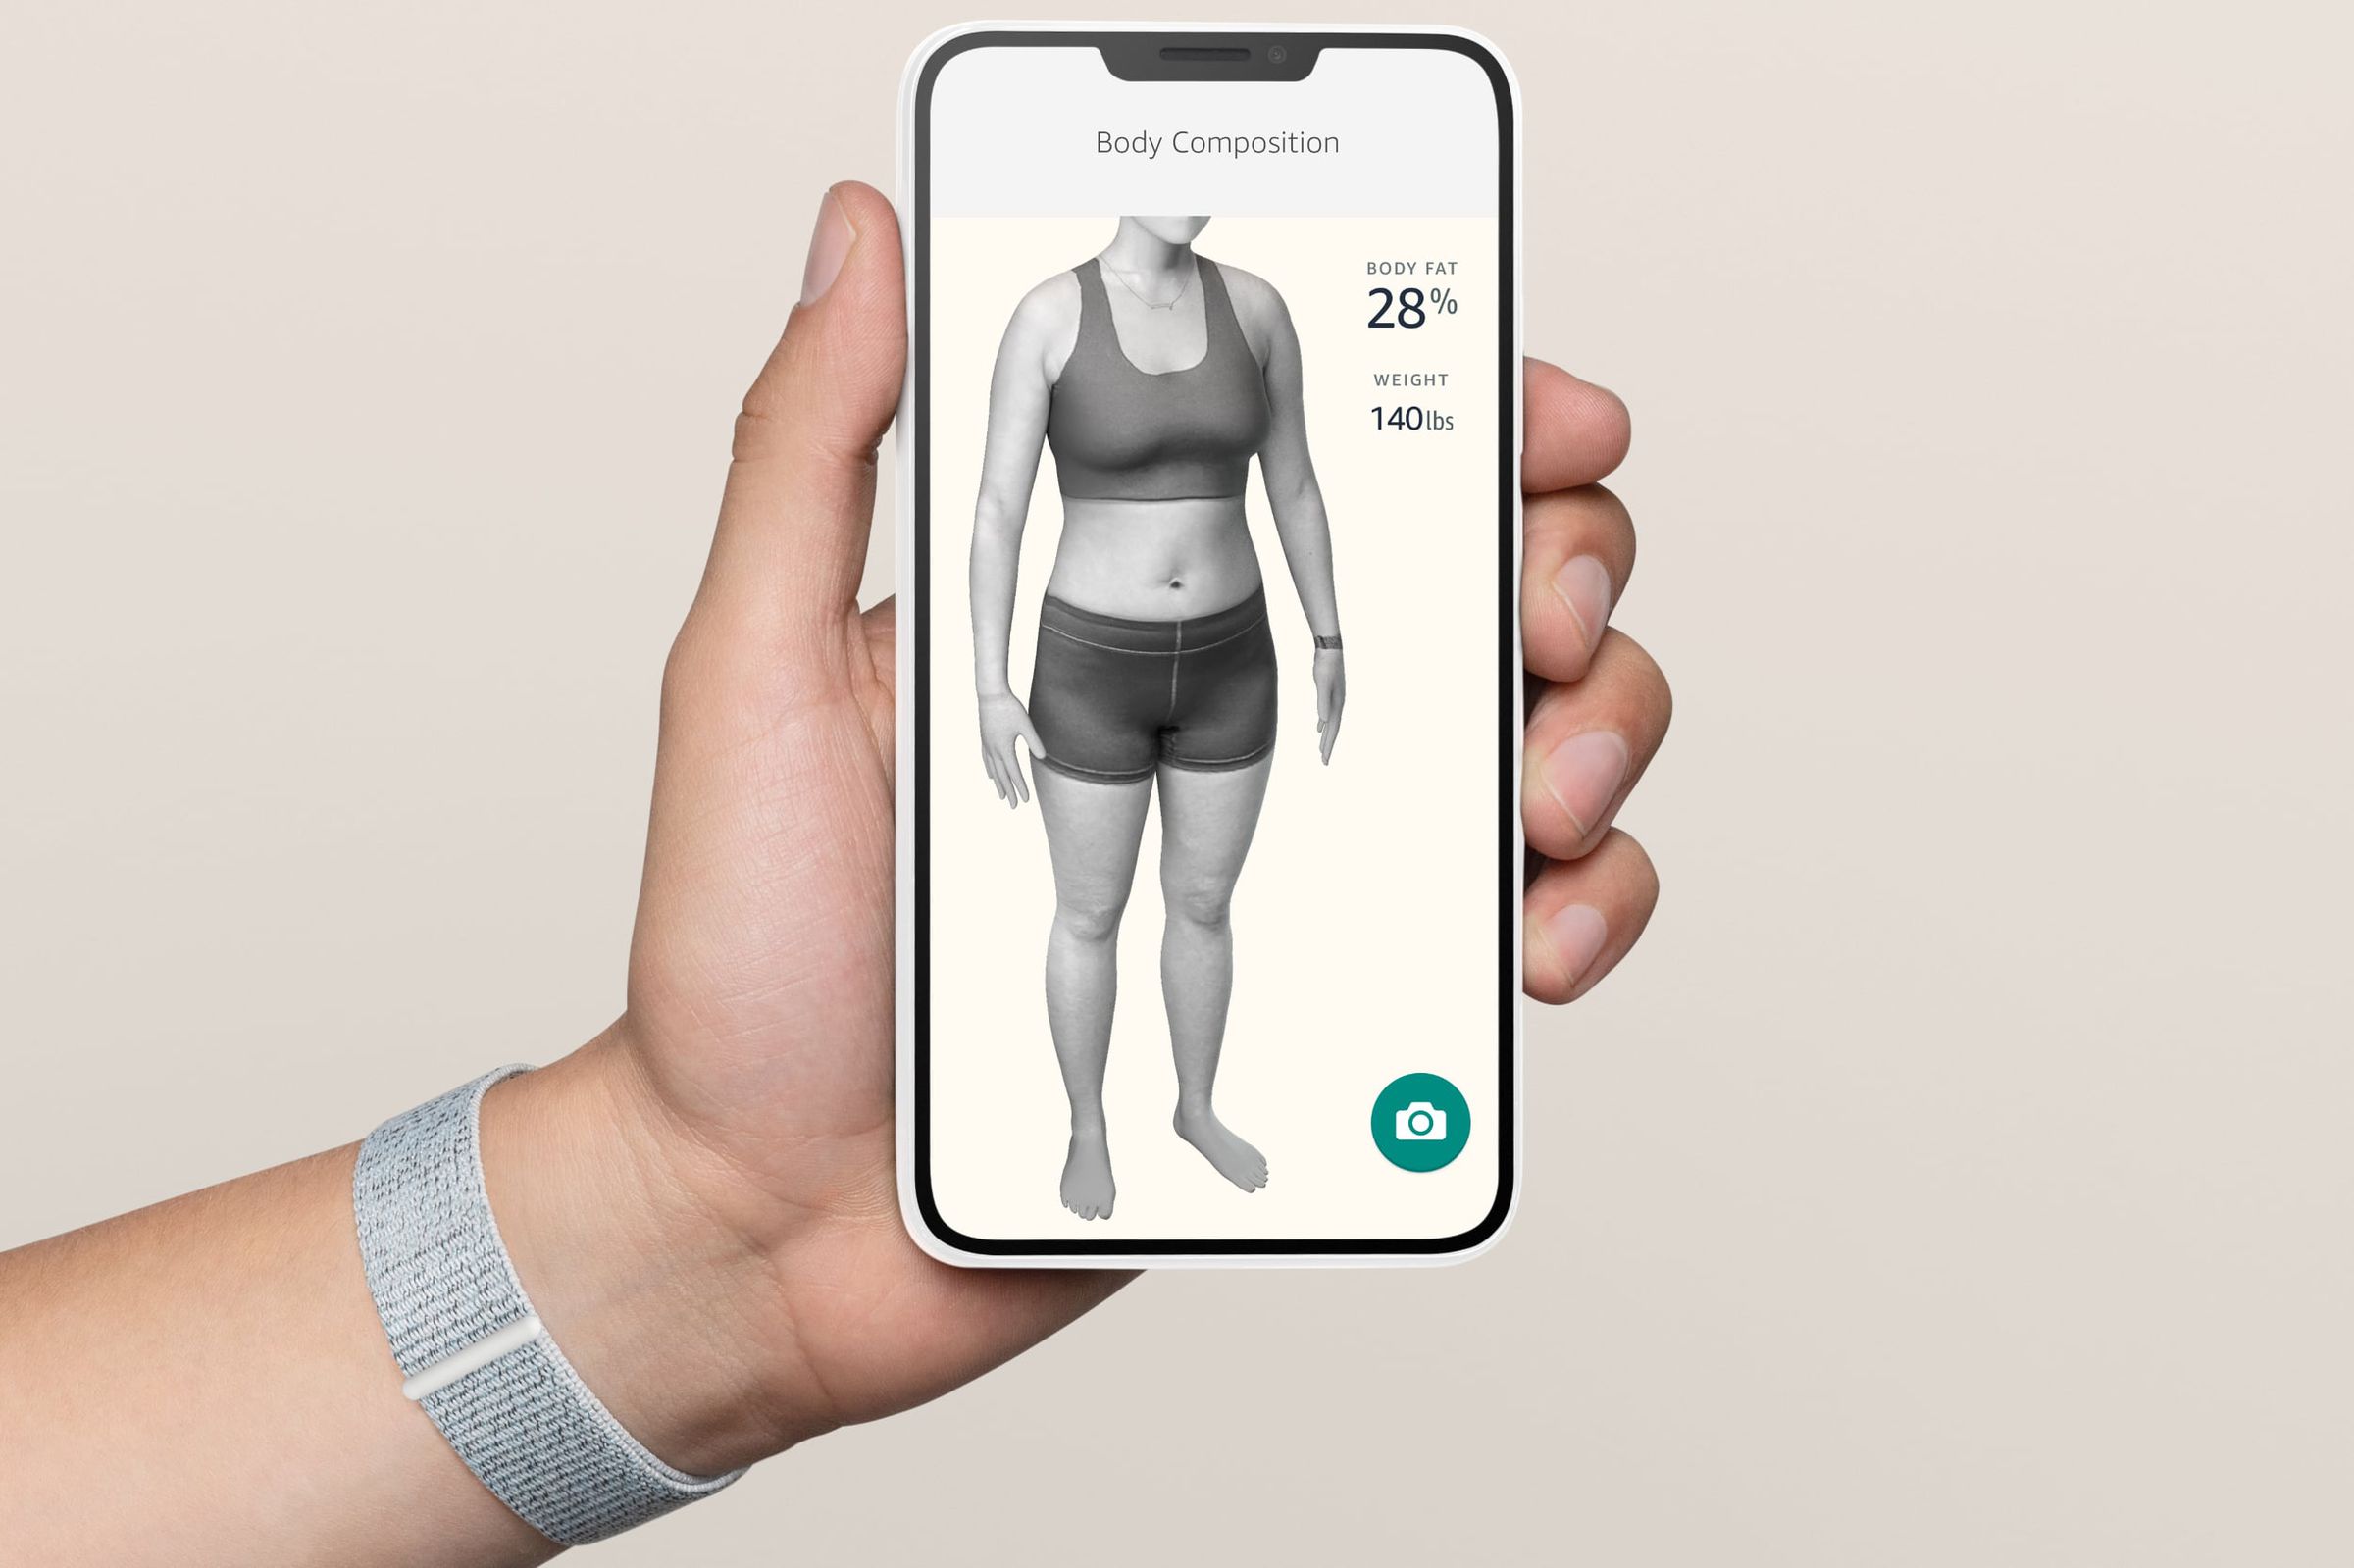 Halo’s body scanning feature, which calculates body fat percentage.